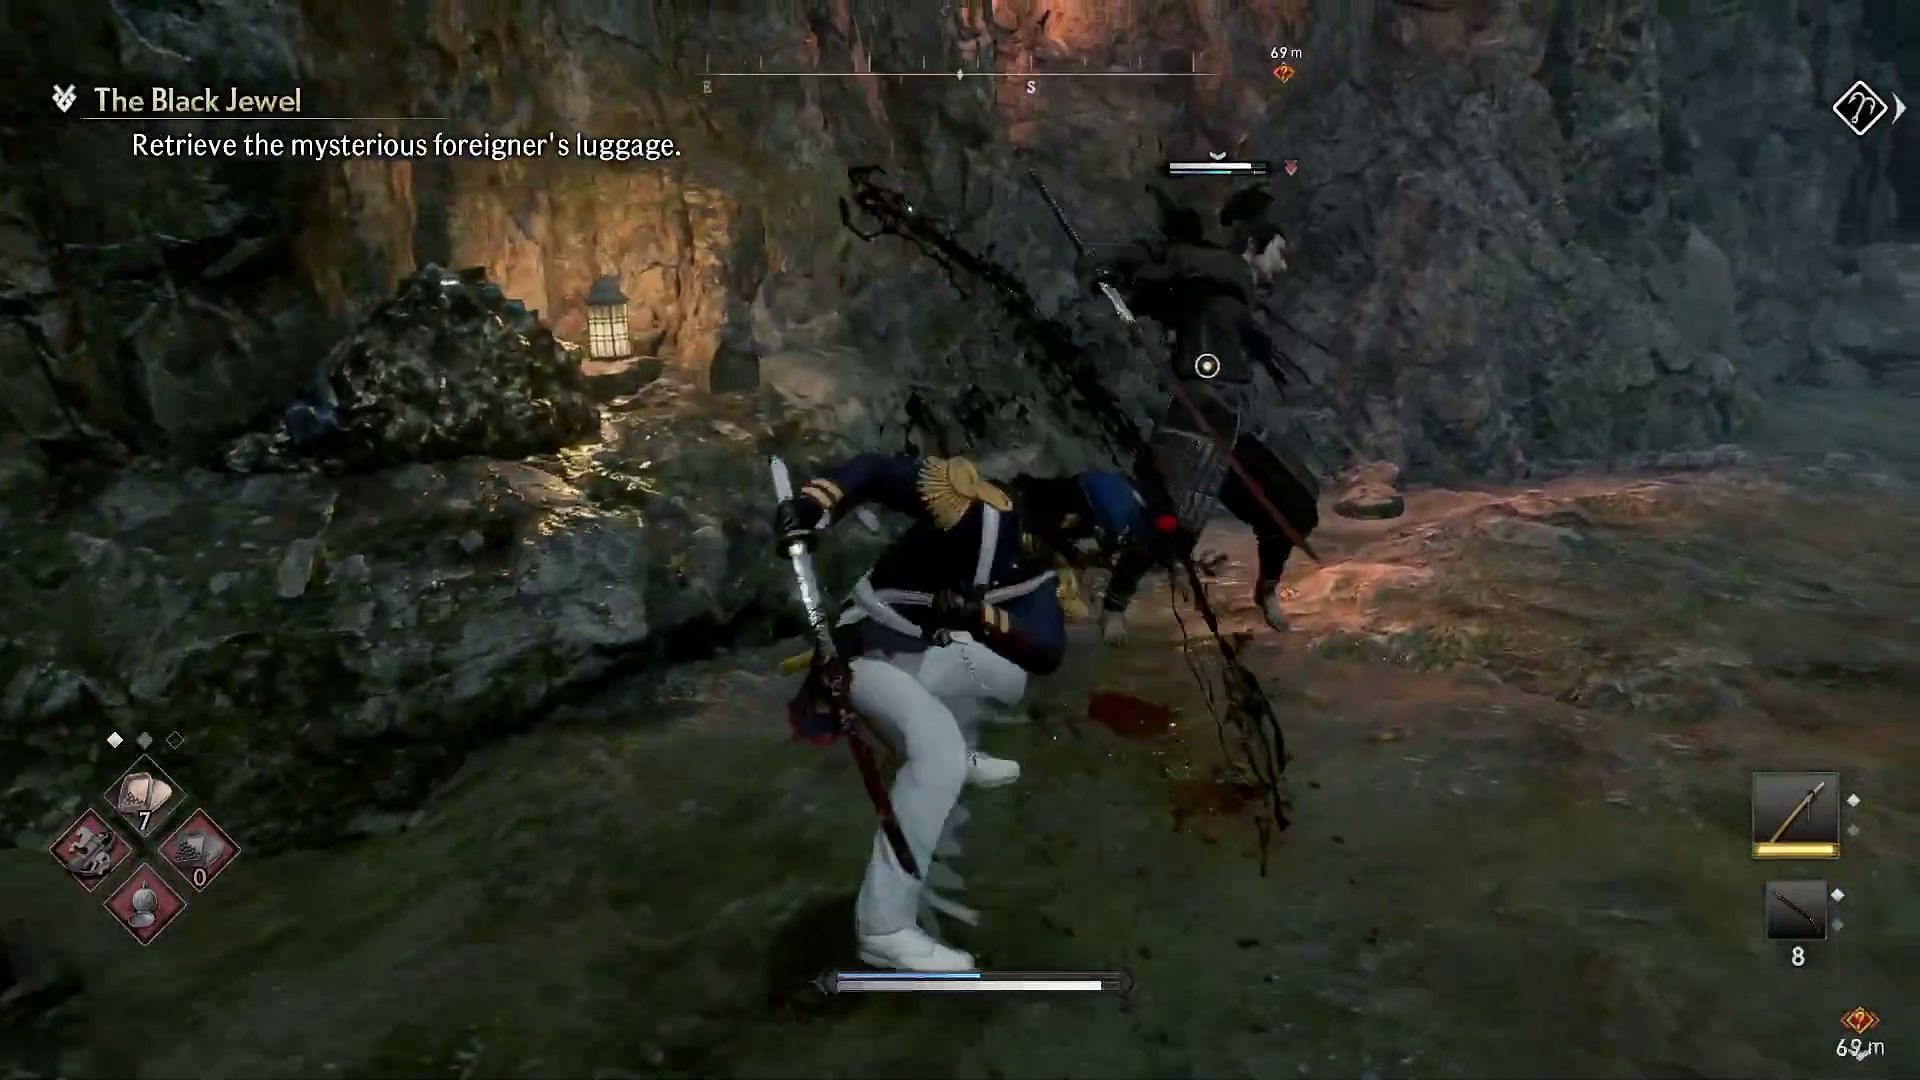 Fighting the bandits in a cave (Image via Sony Interactive Entertainment)